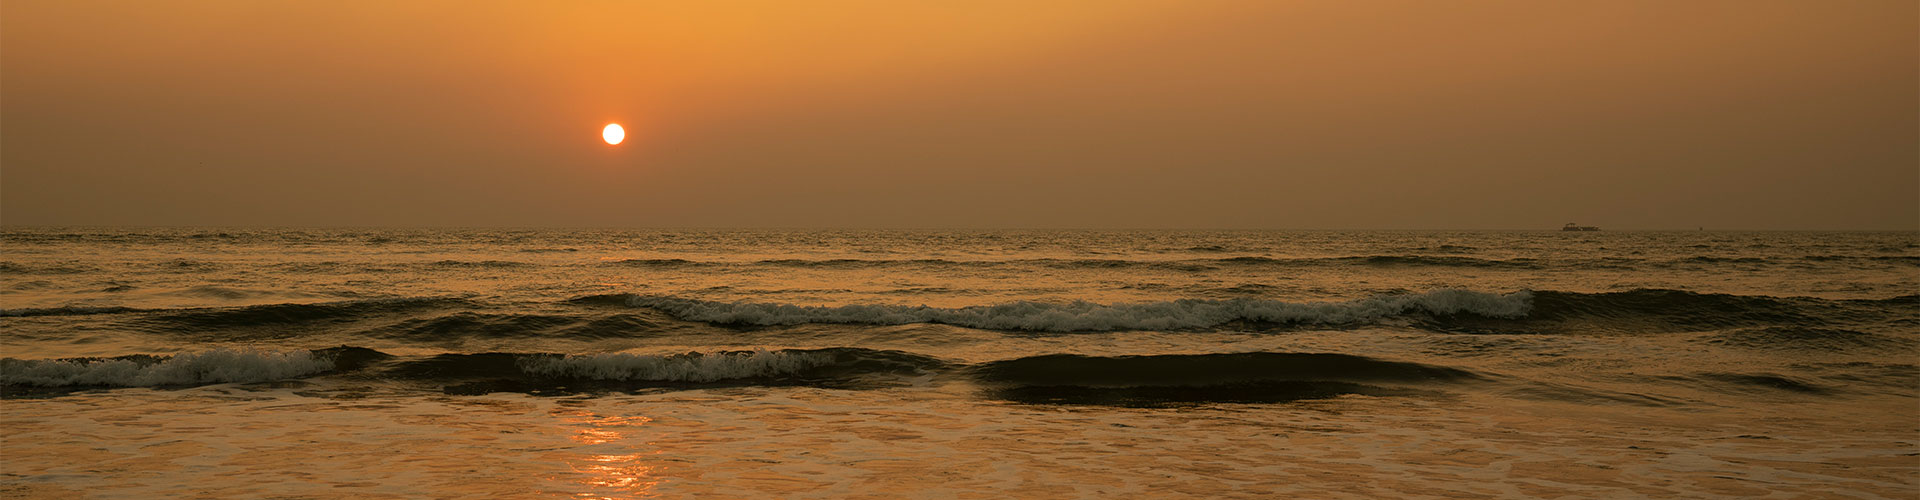 Sunset View at Cox's Bazar